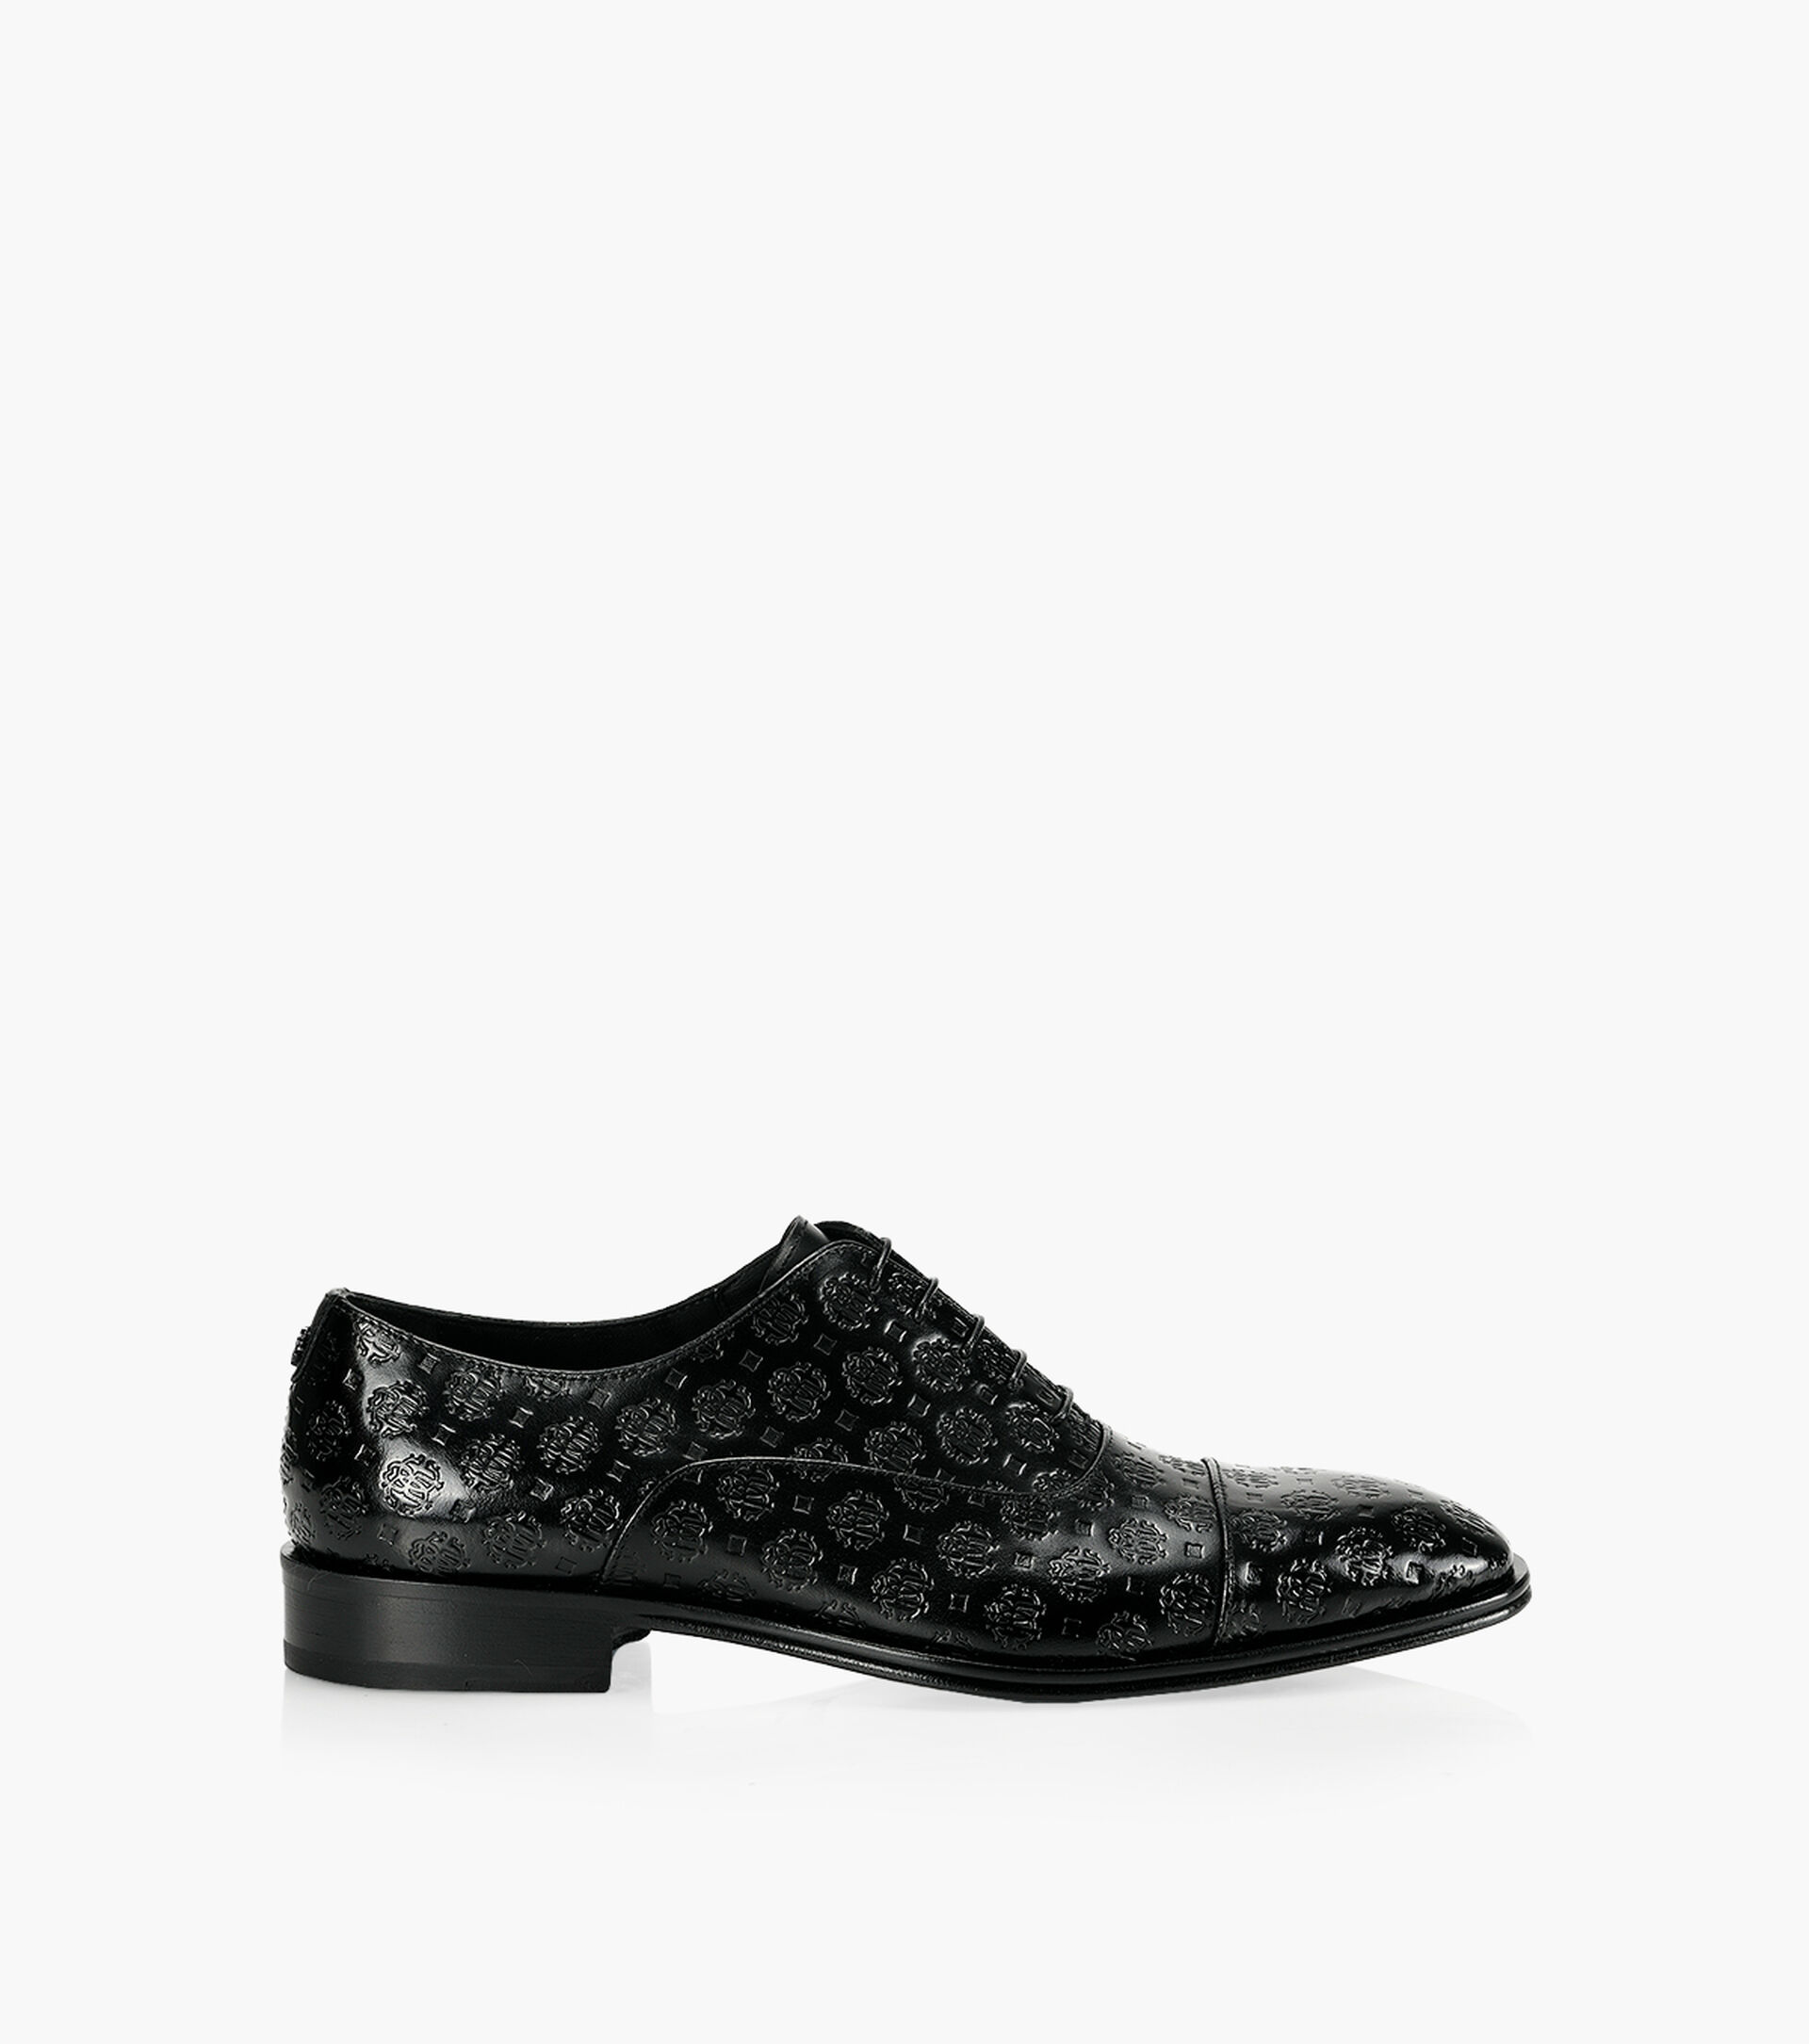 ROBERTO CAVALLI 10746 A - Black Leather | Browns Shoes